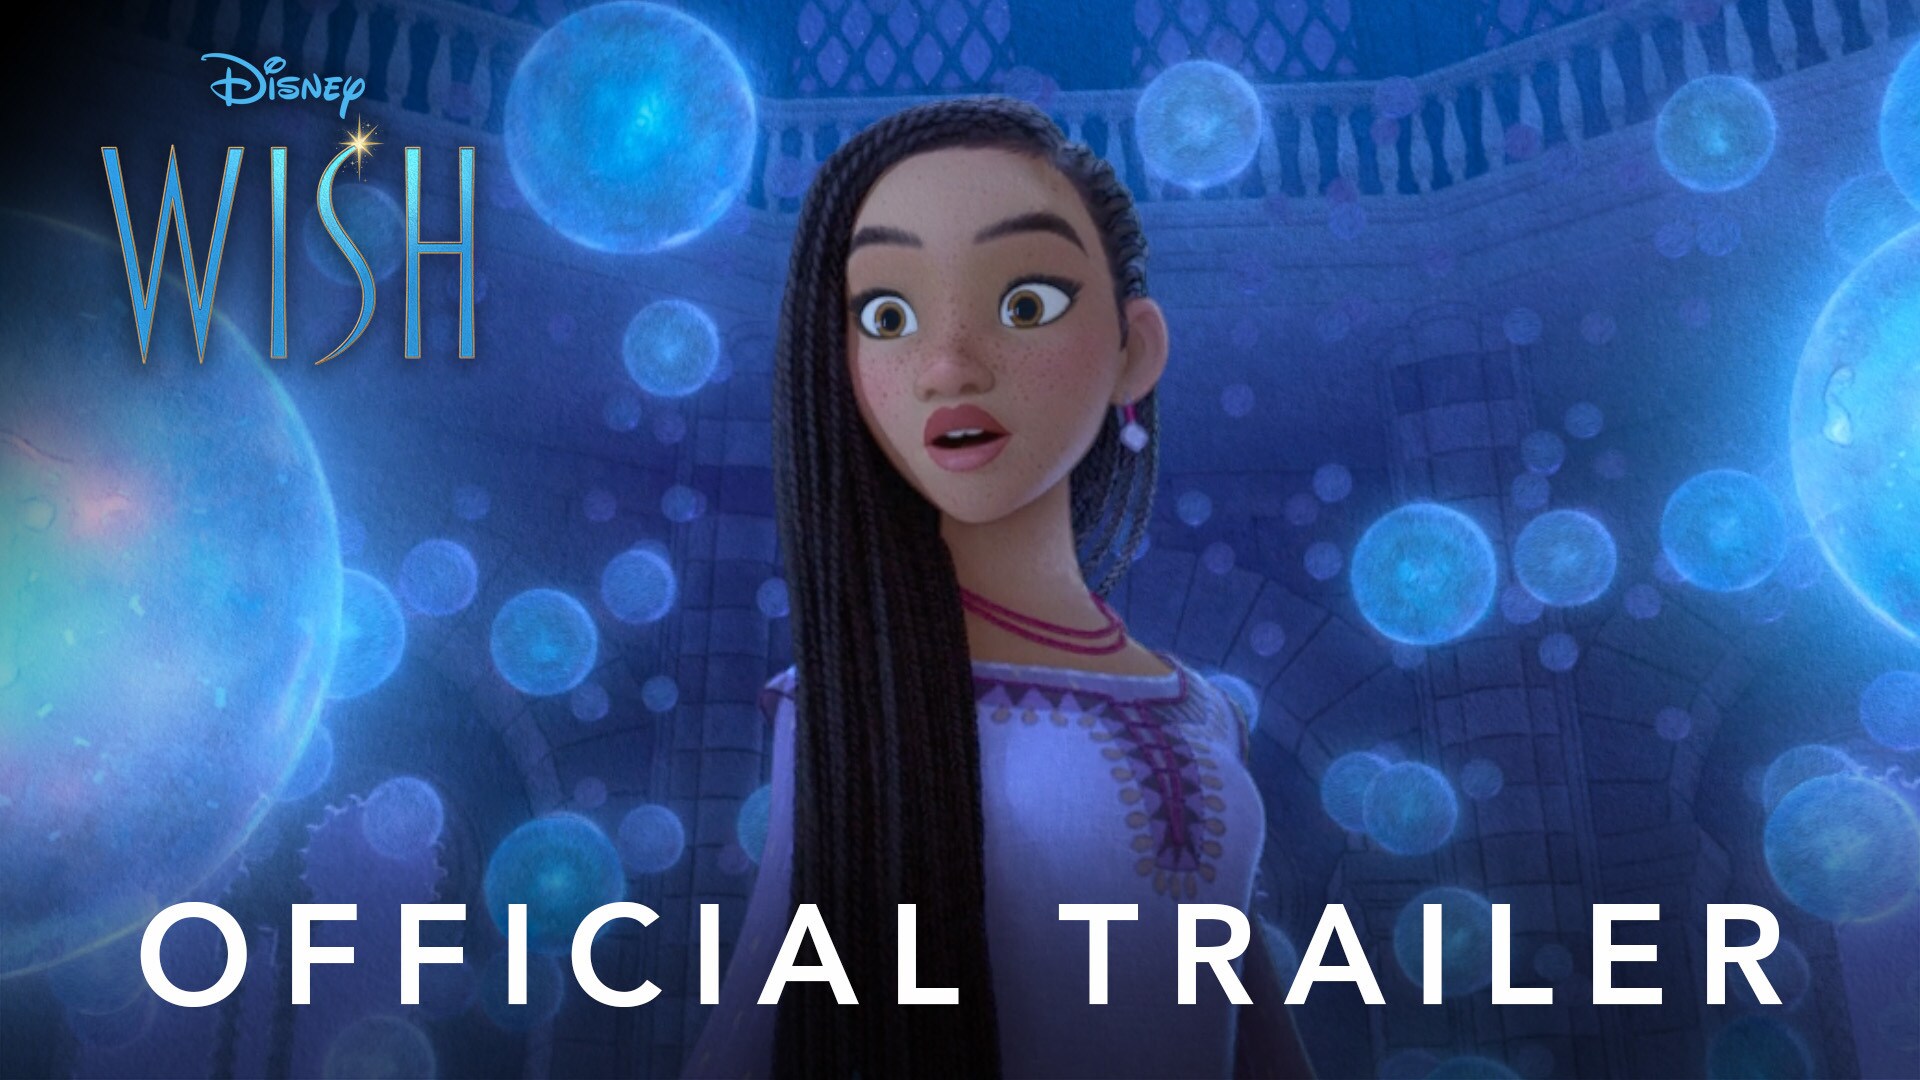 Disney's Wish Official Trailer